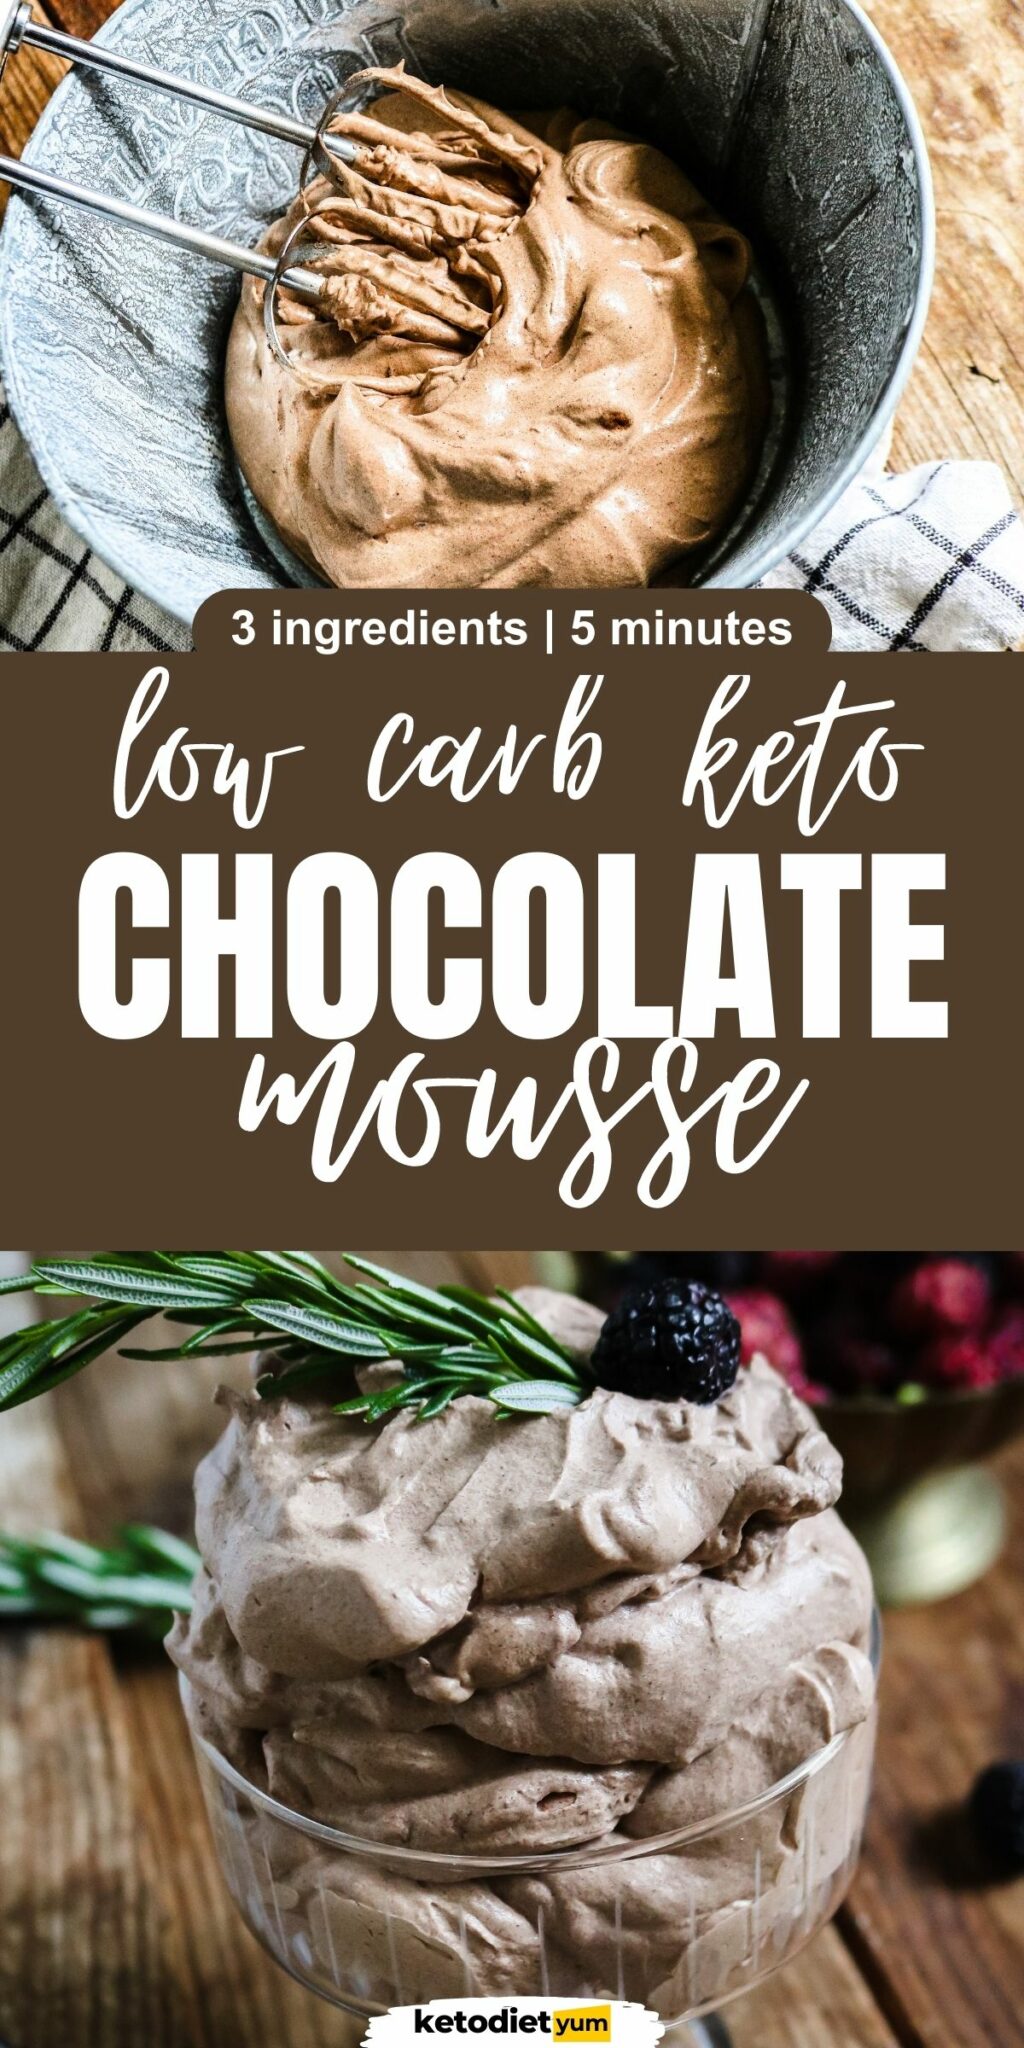 Keto Chocolate Mousse (3 Ingredients + 5 Minutes)